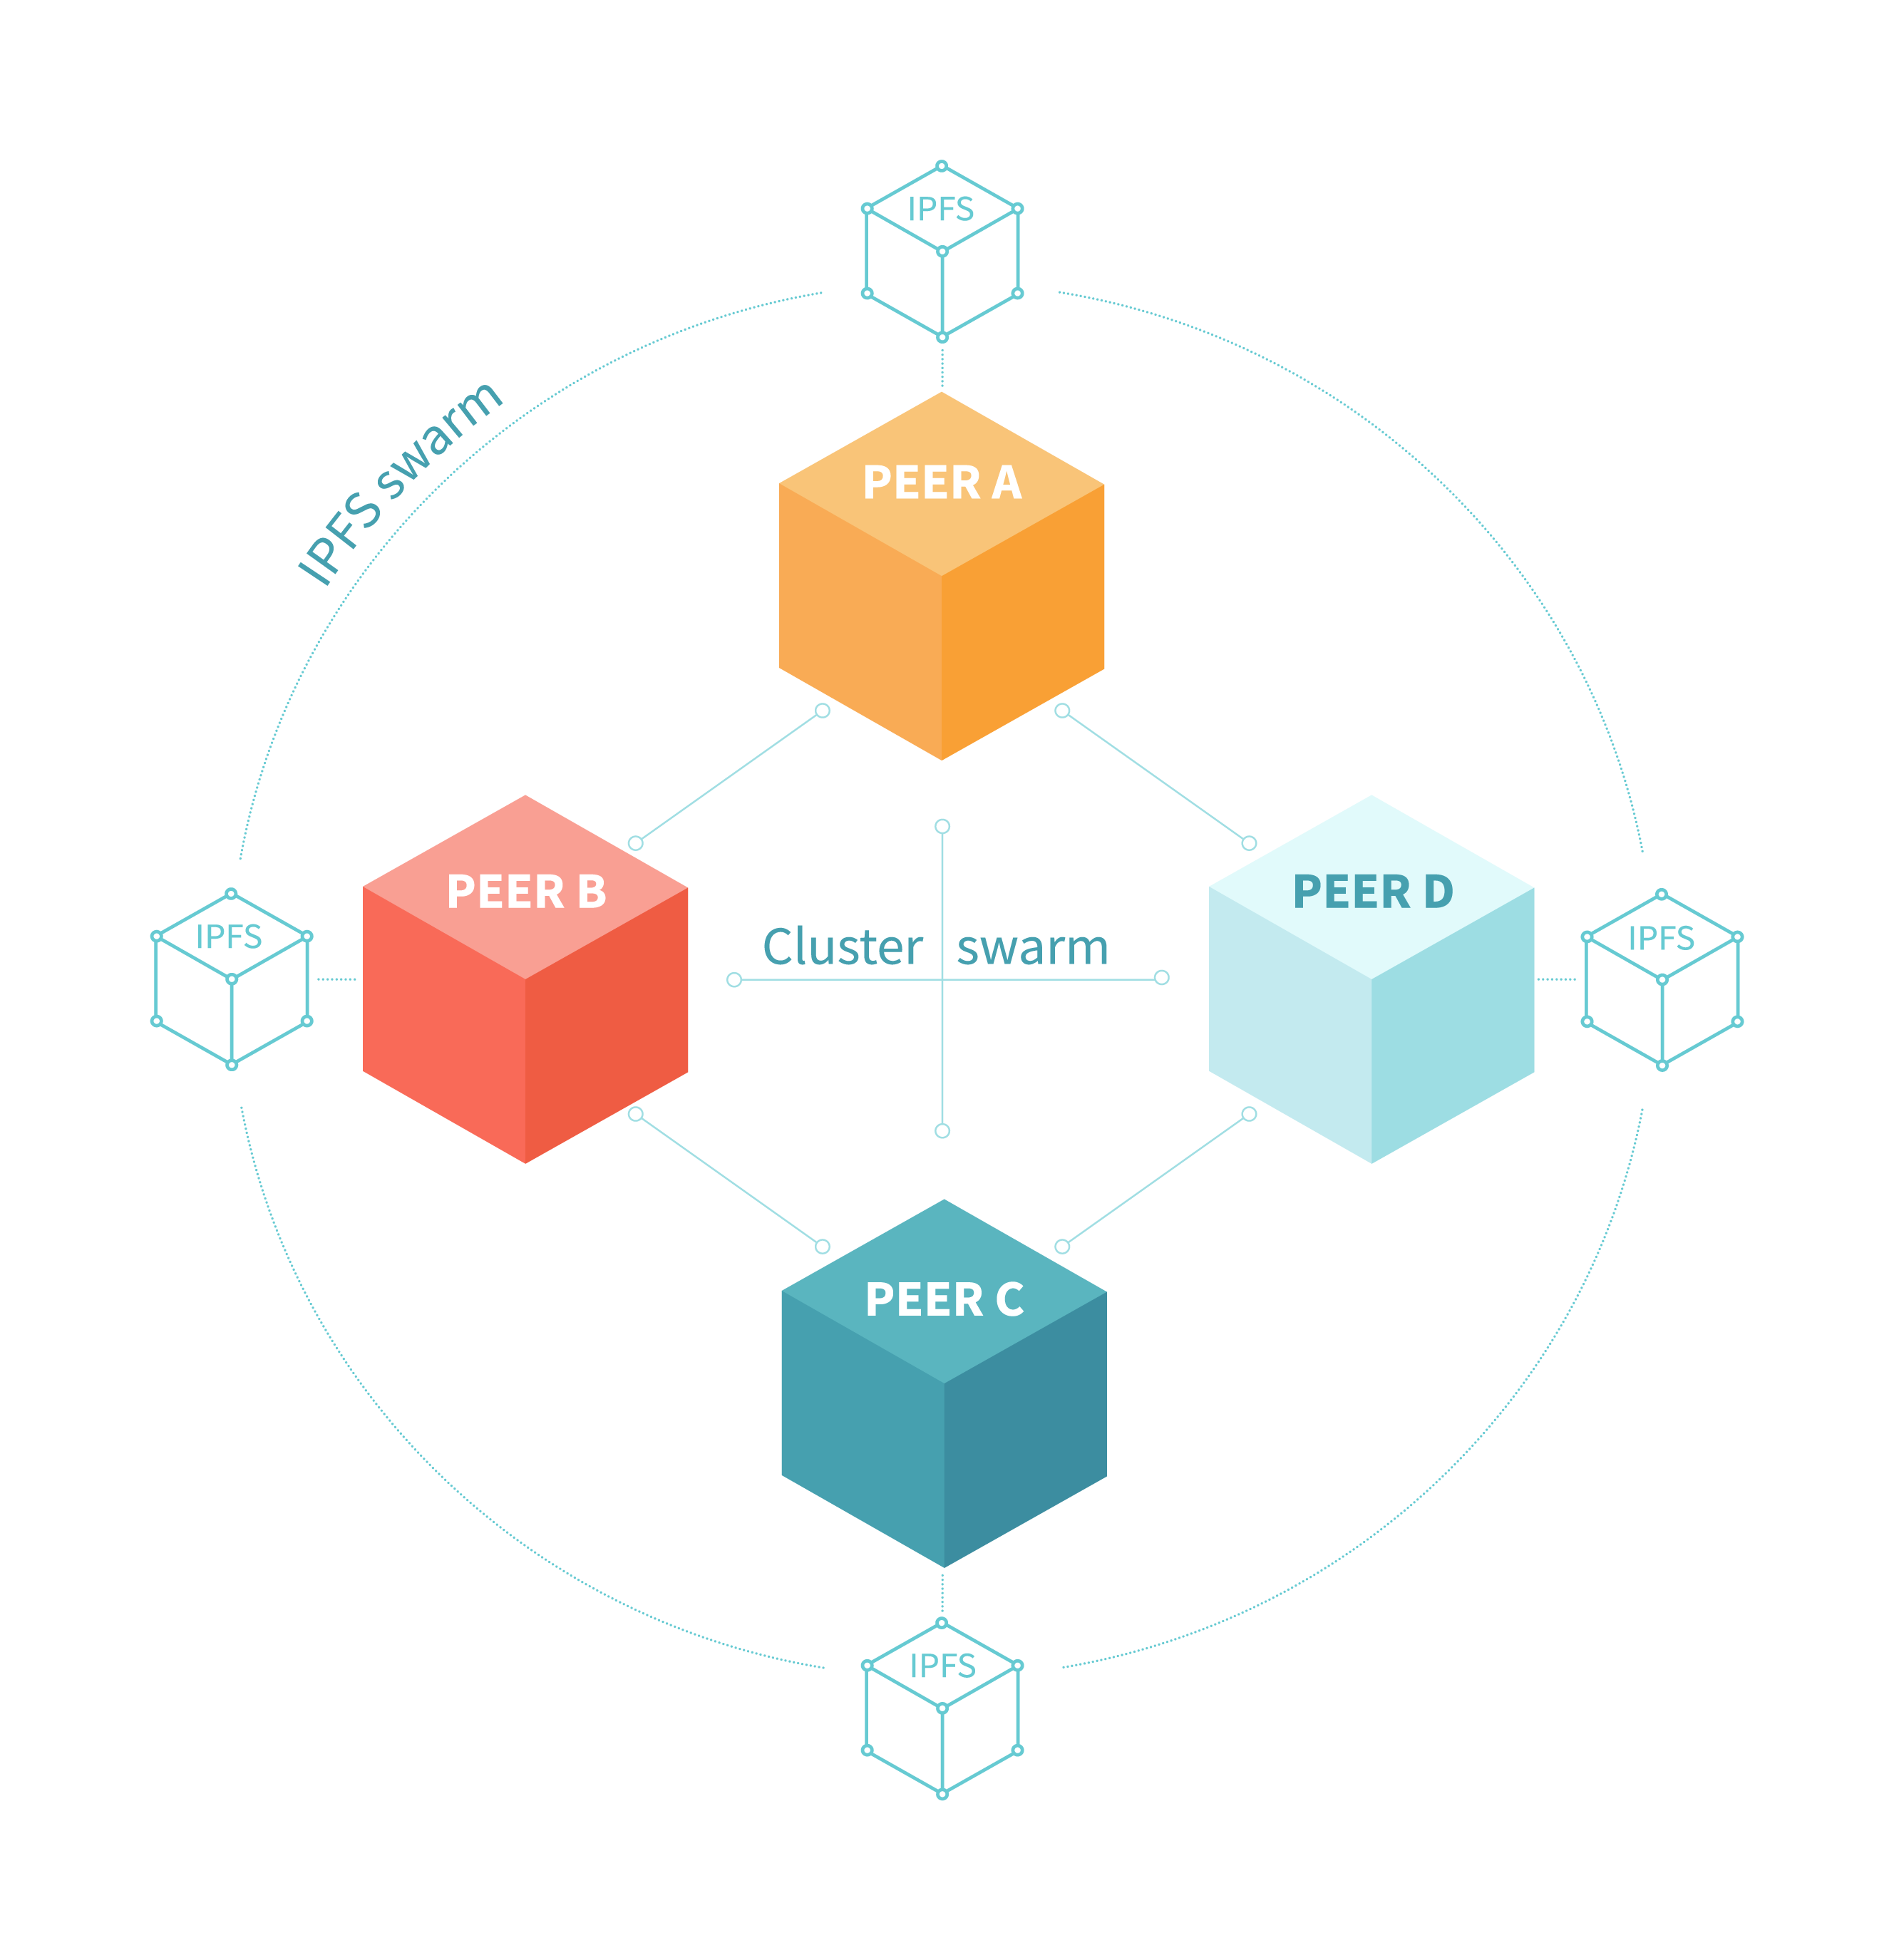 A typical IPFS Cluster